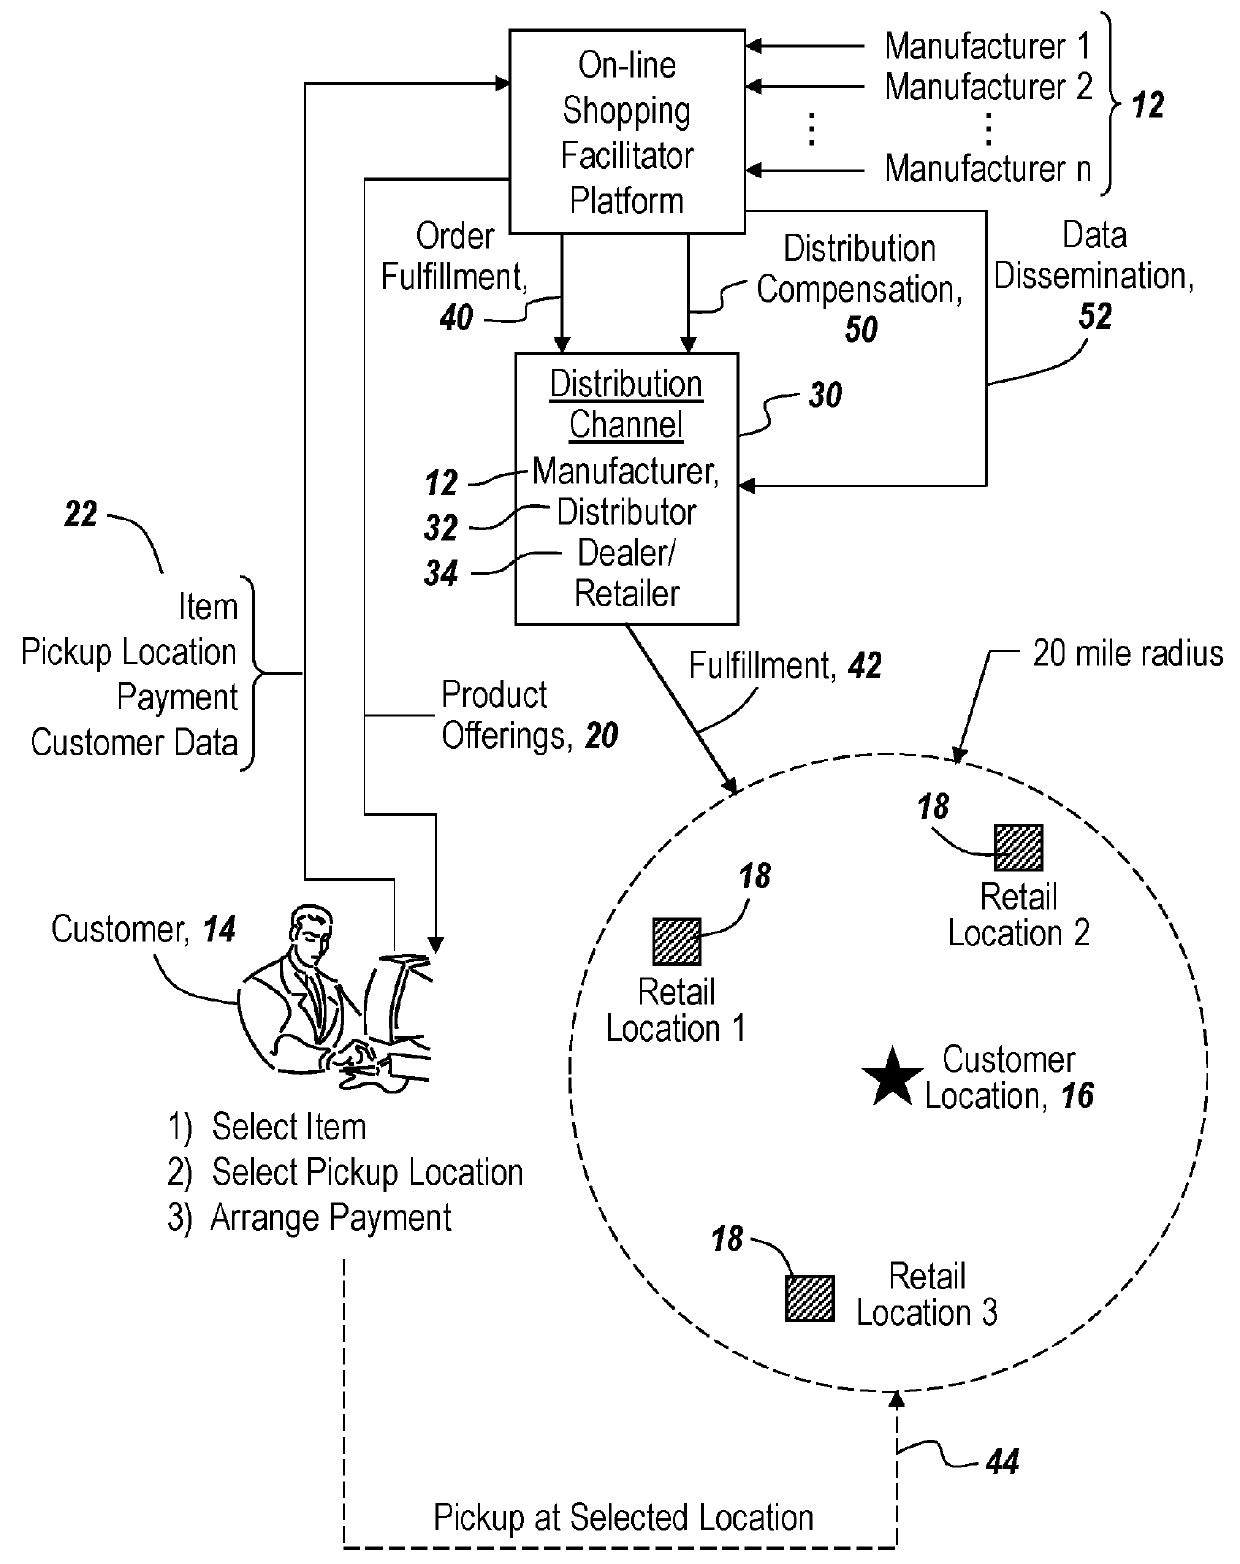 Online Shopping Facilitator Involving All Elements of a Distribution Chain